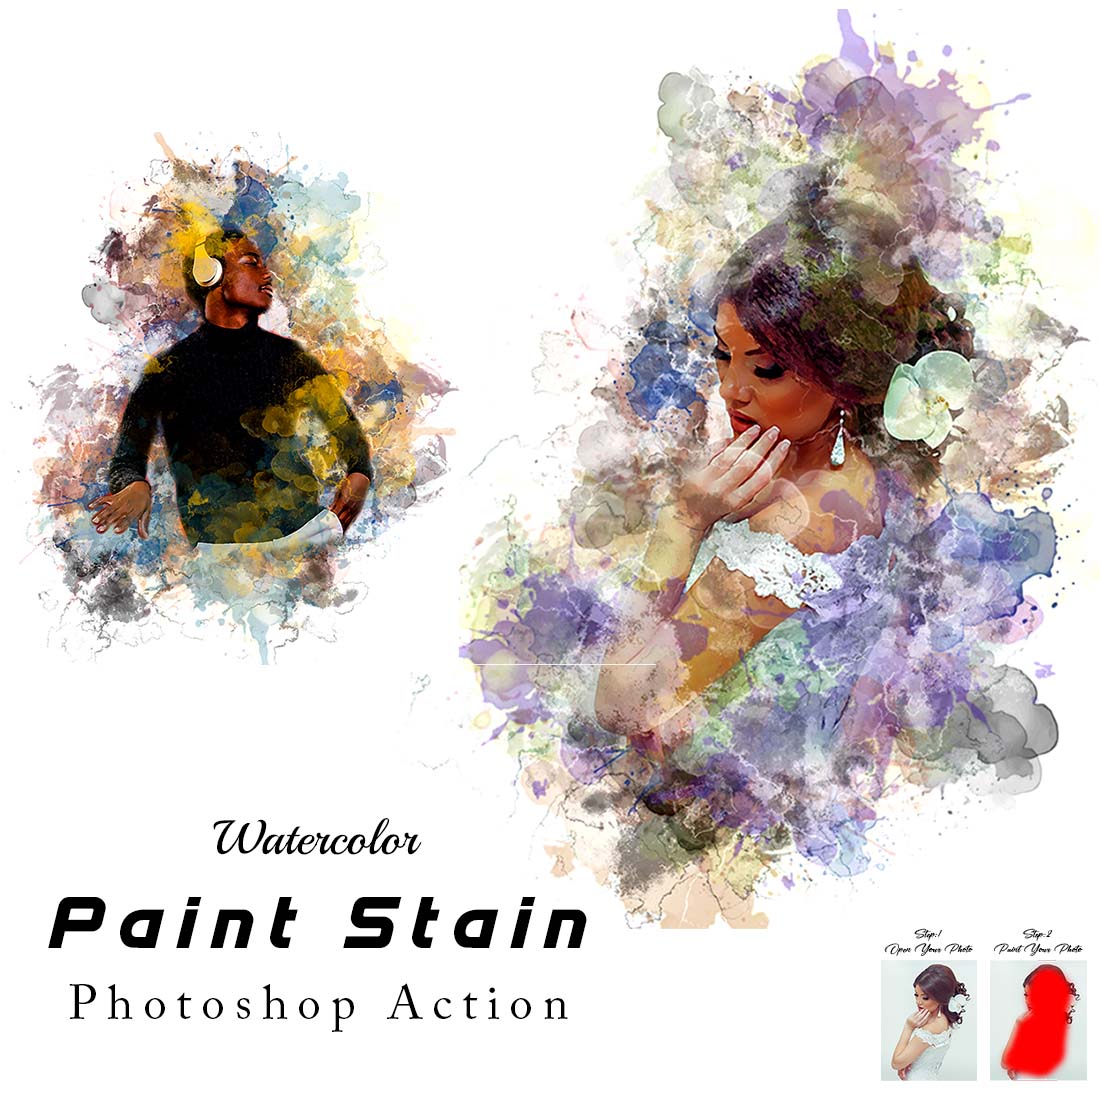 Watercolor Paint Stain Photoshop Action cover image.